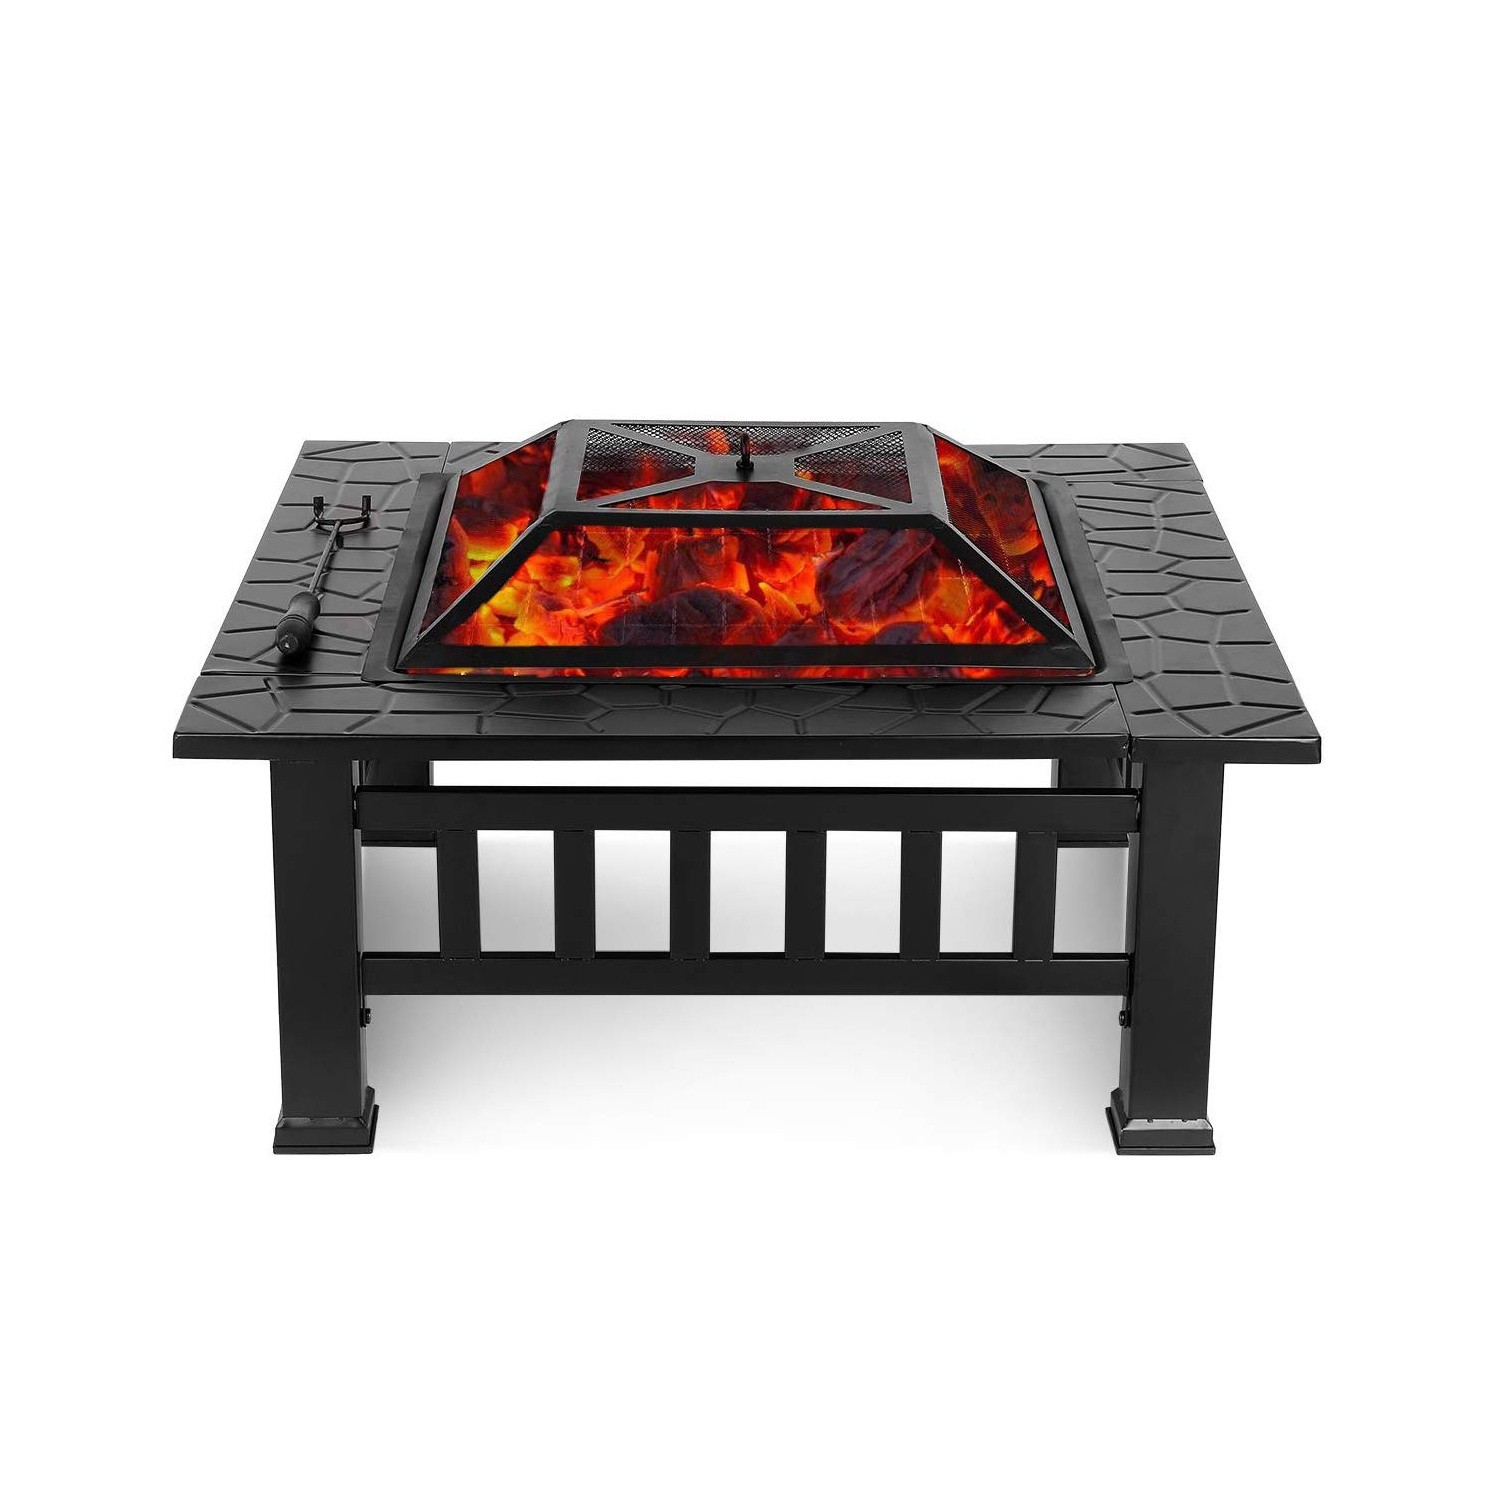 32" Black Square Charcoal or Wood Burning Fire Pit with Cover